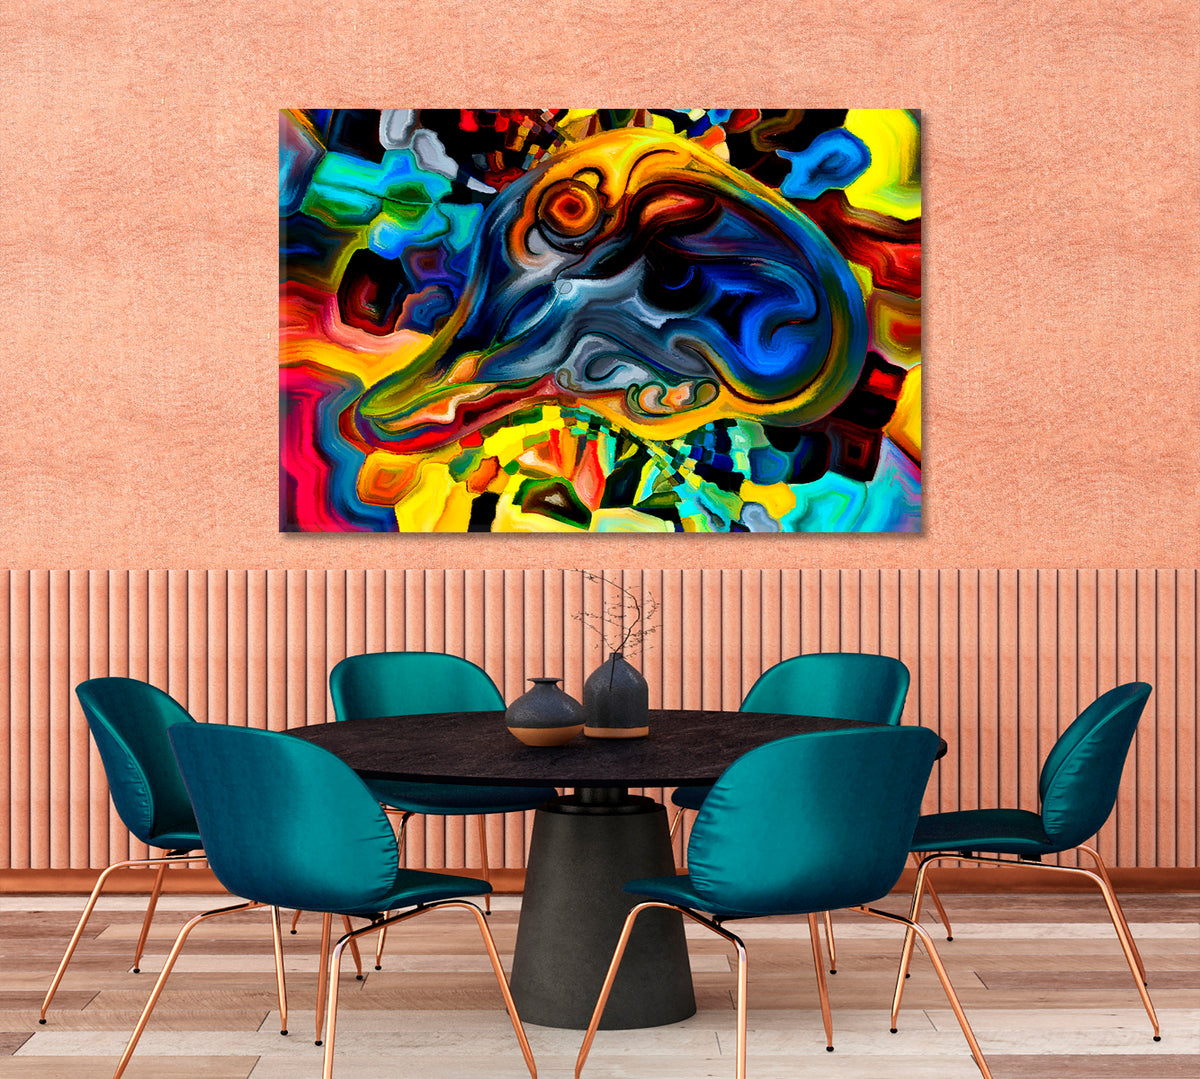 Human and Geometric Forms Collection Abstract Colorful Lines Abstract Art Print Artesty 1 panel 24" x 16" 